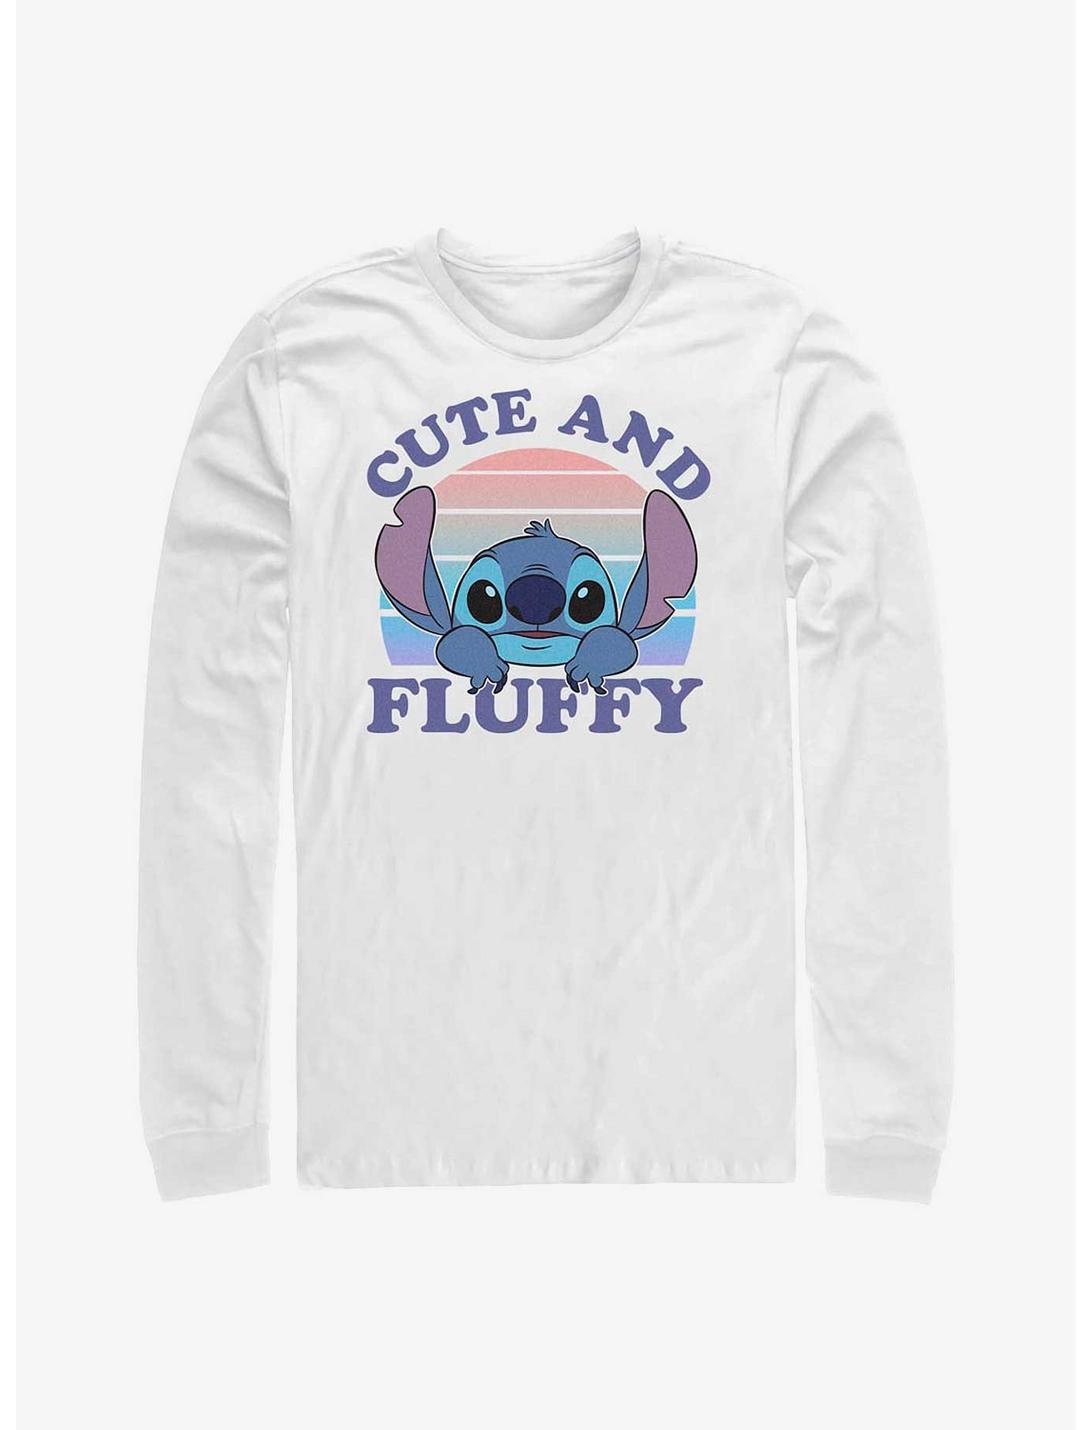 Disney Lilo & Stitch Cute And Fluffy Long-Sleeve T-Shirt, WHITE, hi-res